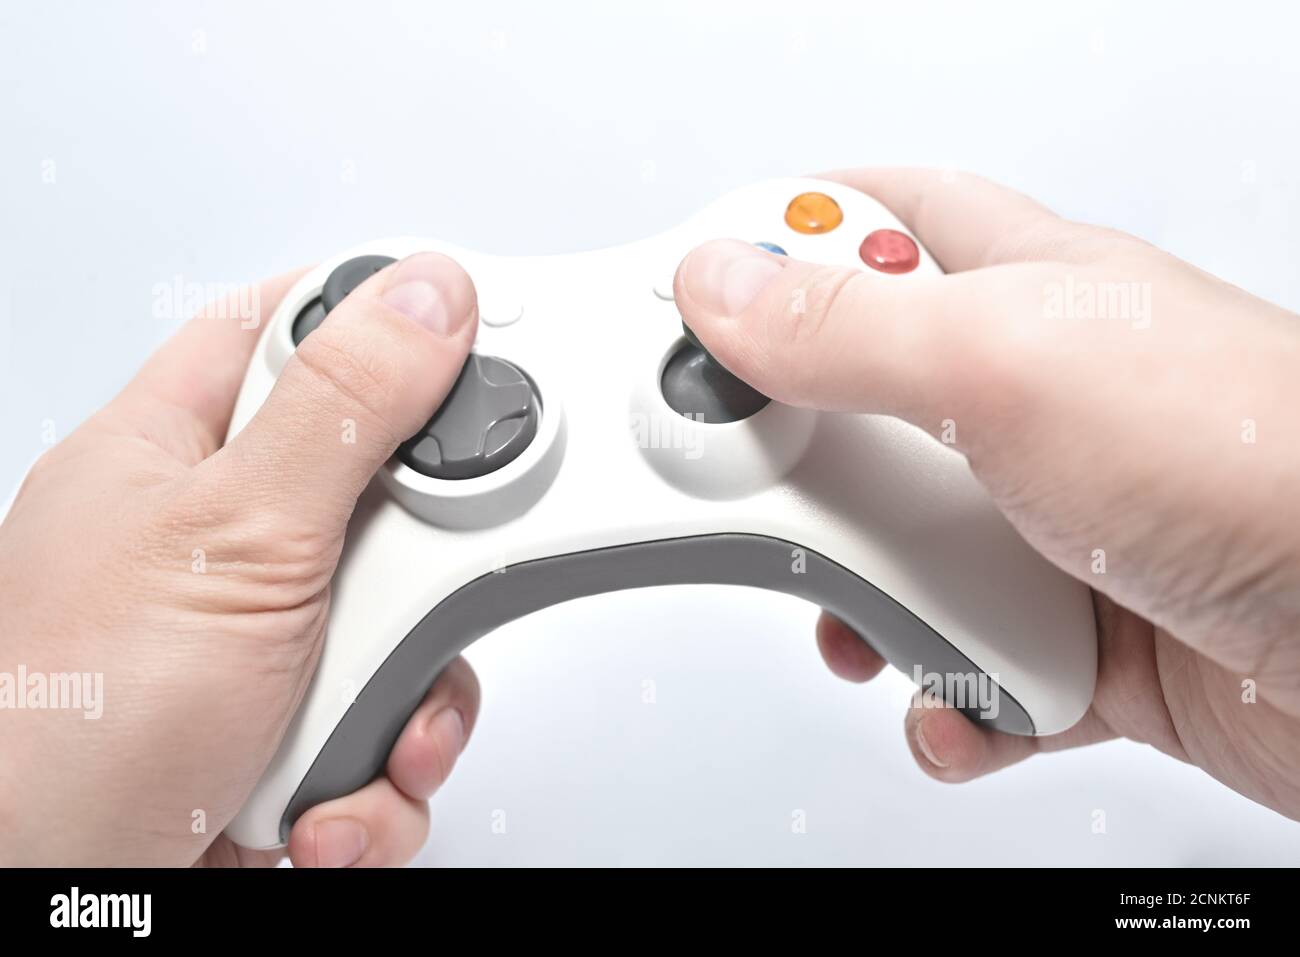 joystick gamepad in the player's hands isolated on white background. entertainment concept Stock Photo